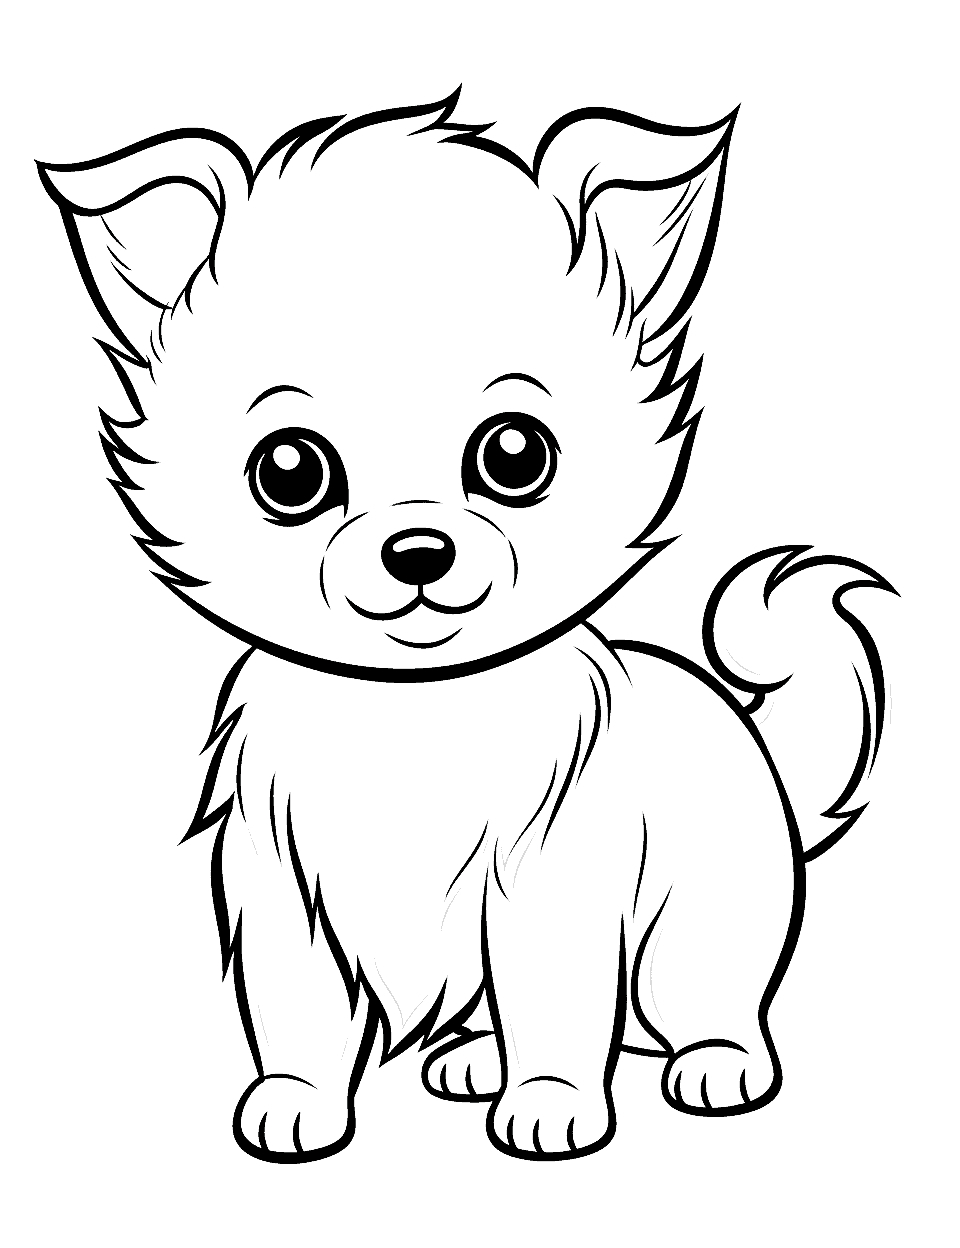 Adorable and Small Baby Pomeranian Puppy Coloring Page - An adorable baby Pomeranian with fluffy fur and a tiny tail.